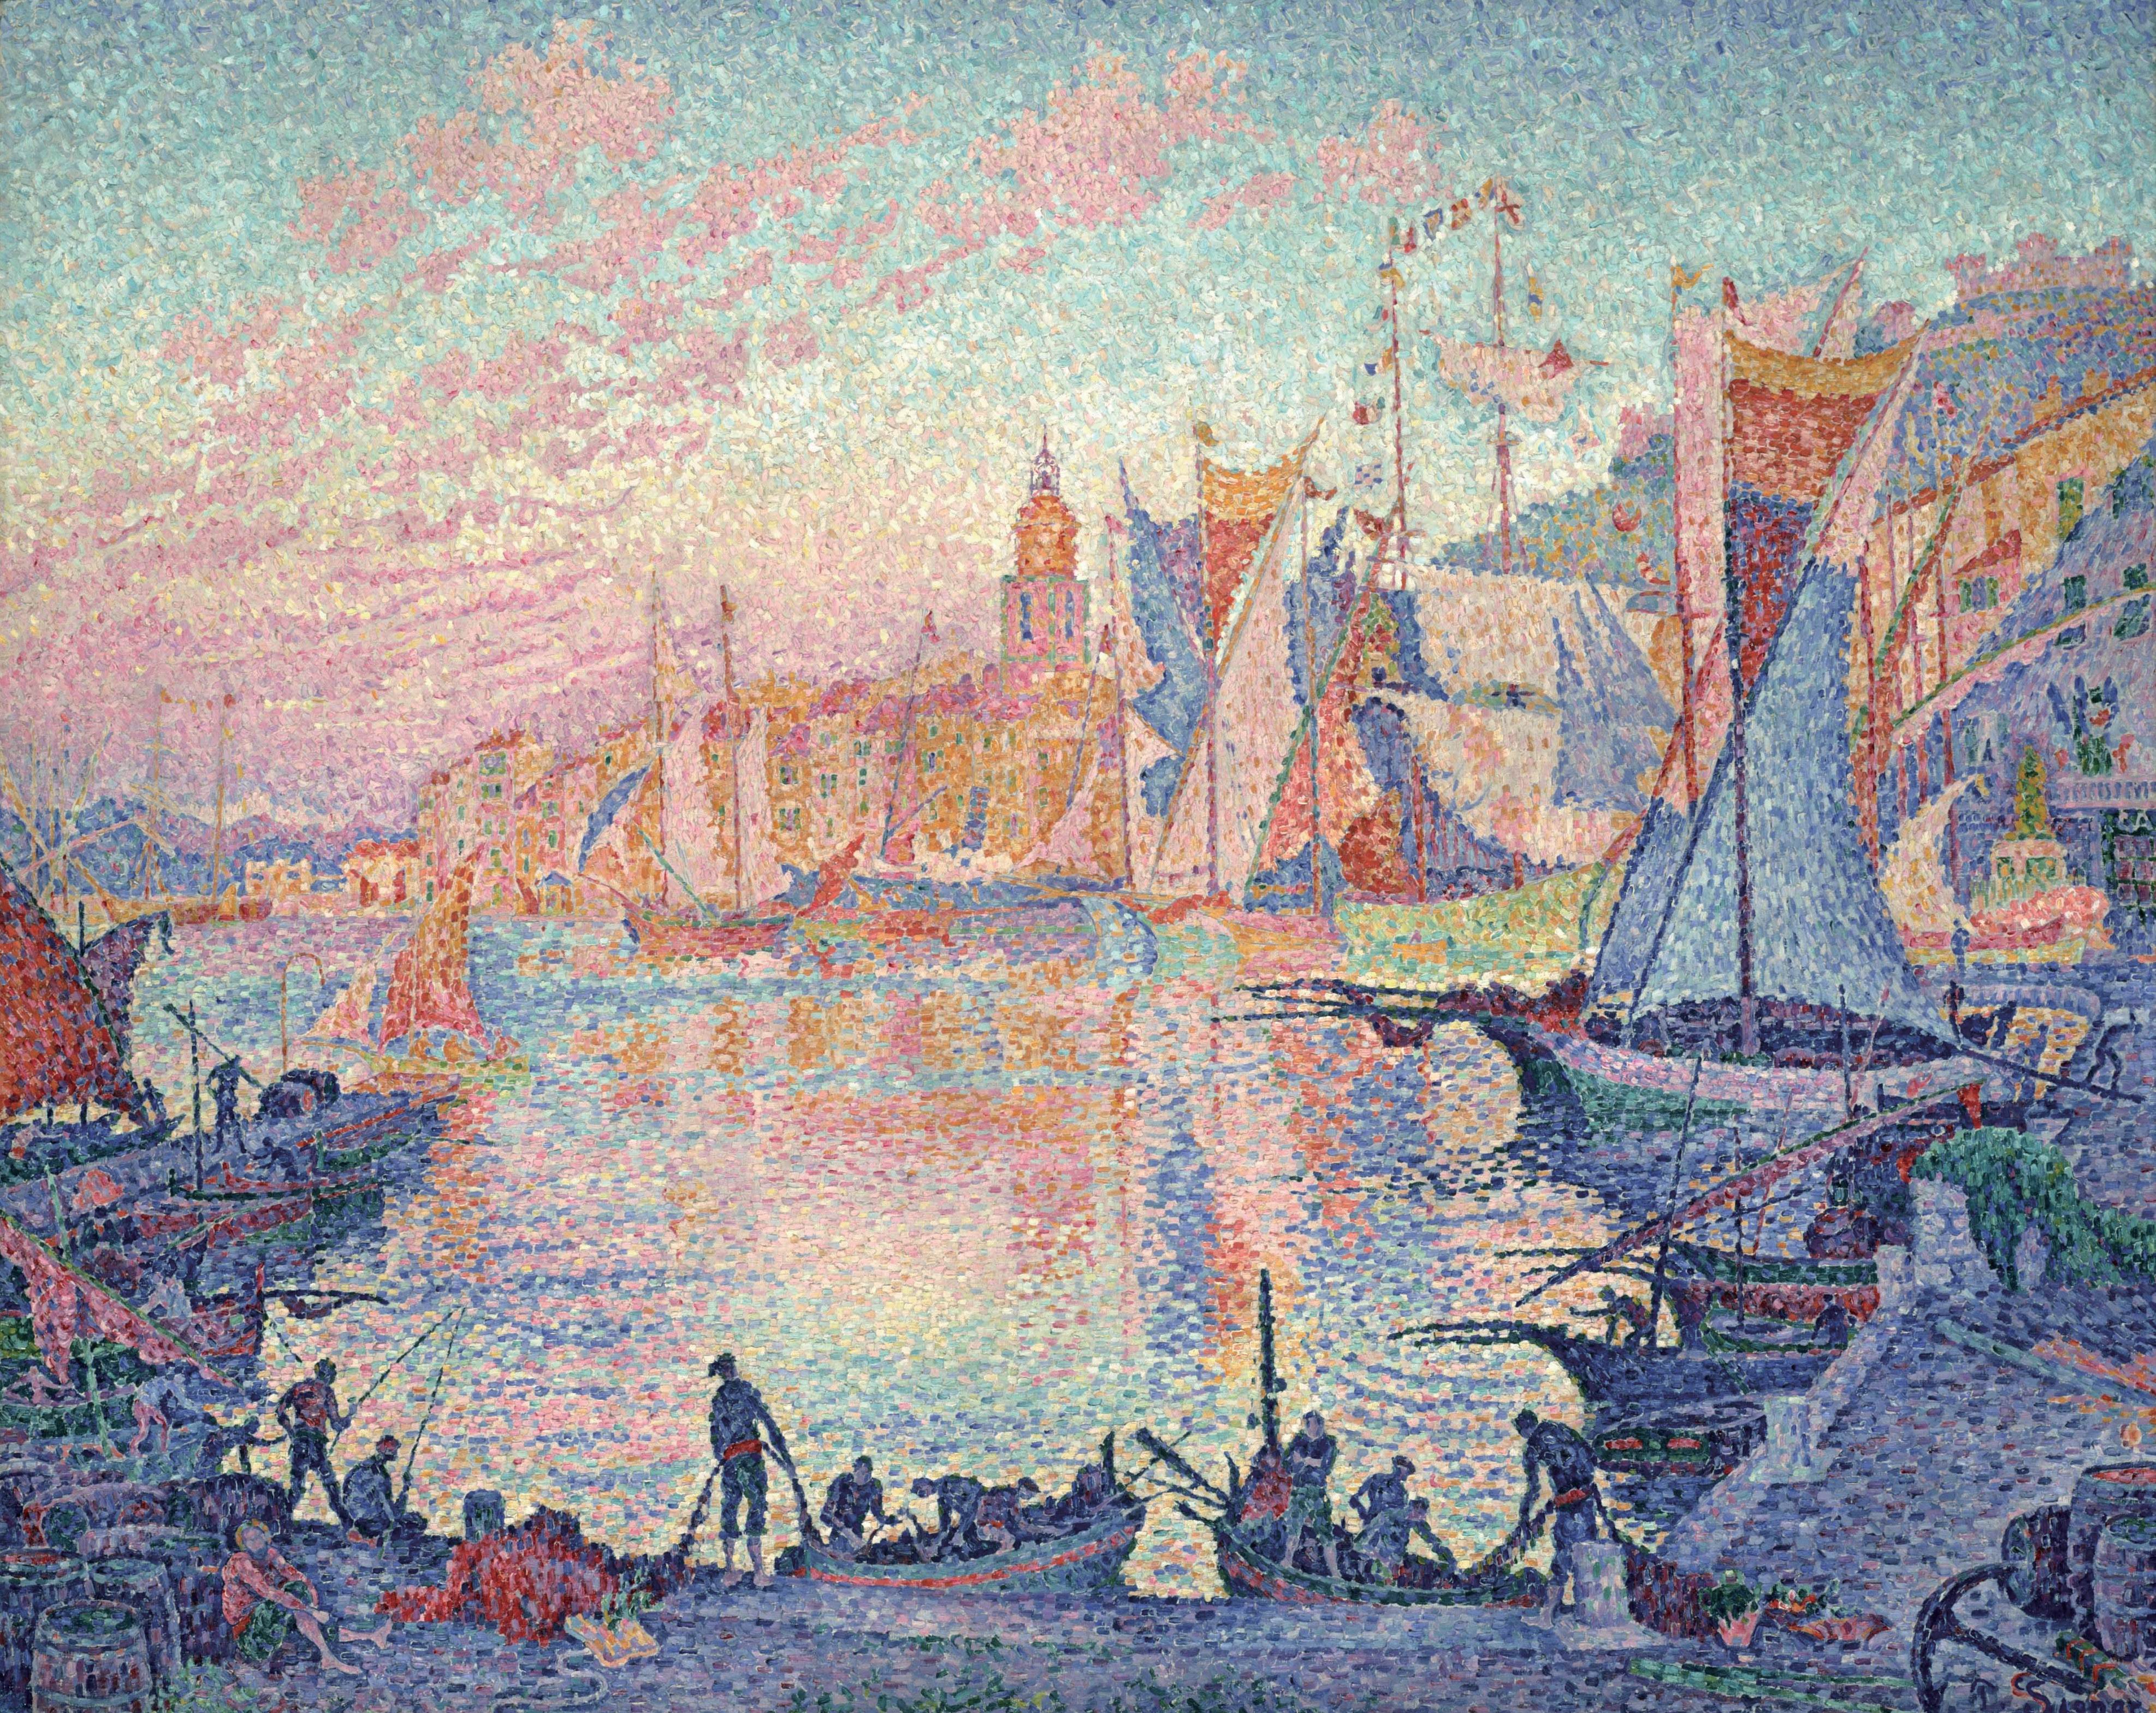 Oil On Canvas Oil Painting Paul Signac Water Artwork Classic Art Boat Clouds Sky Ship 3948x3137